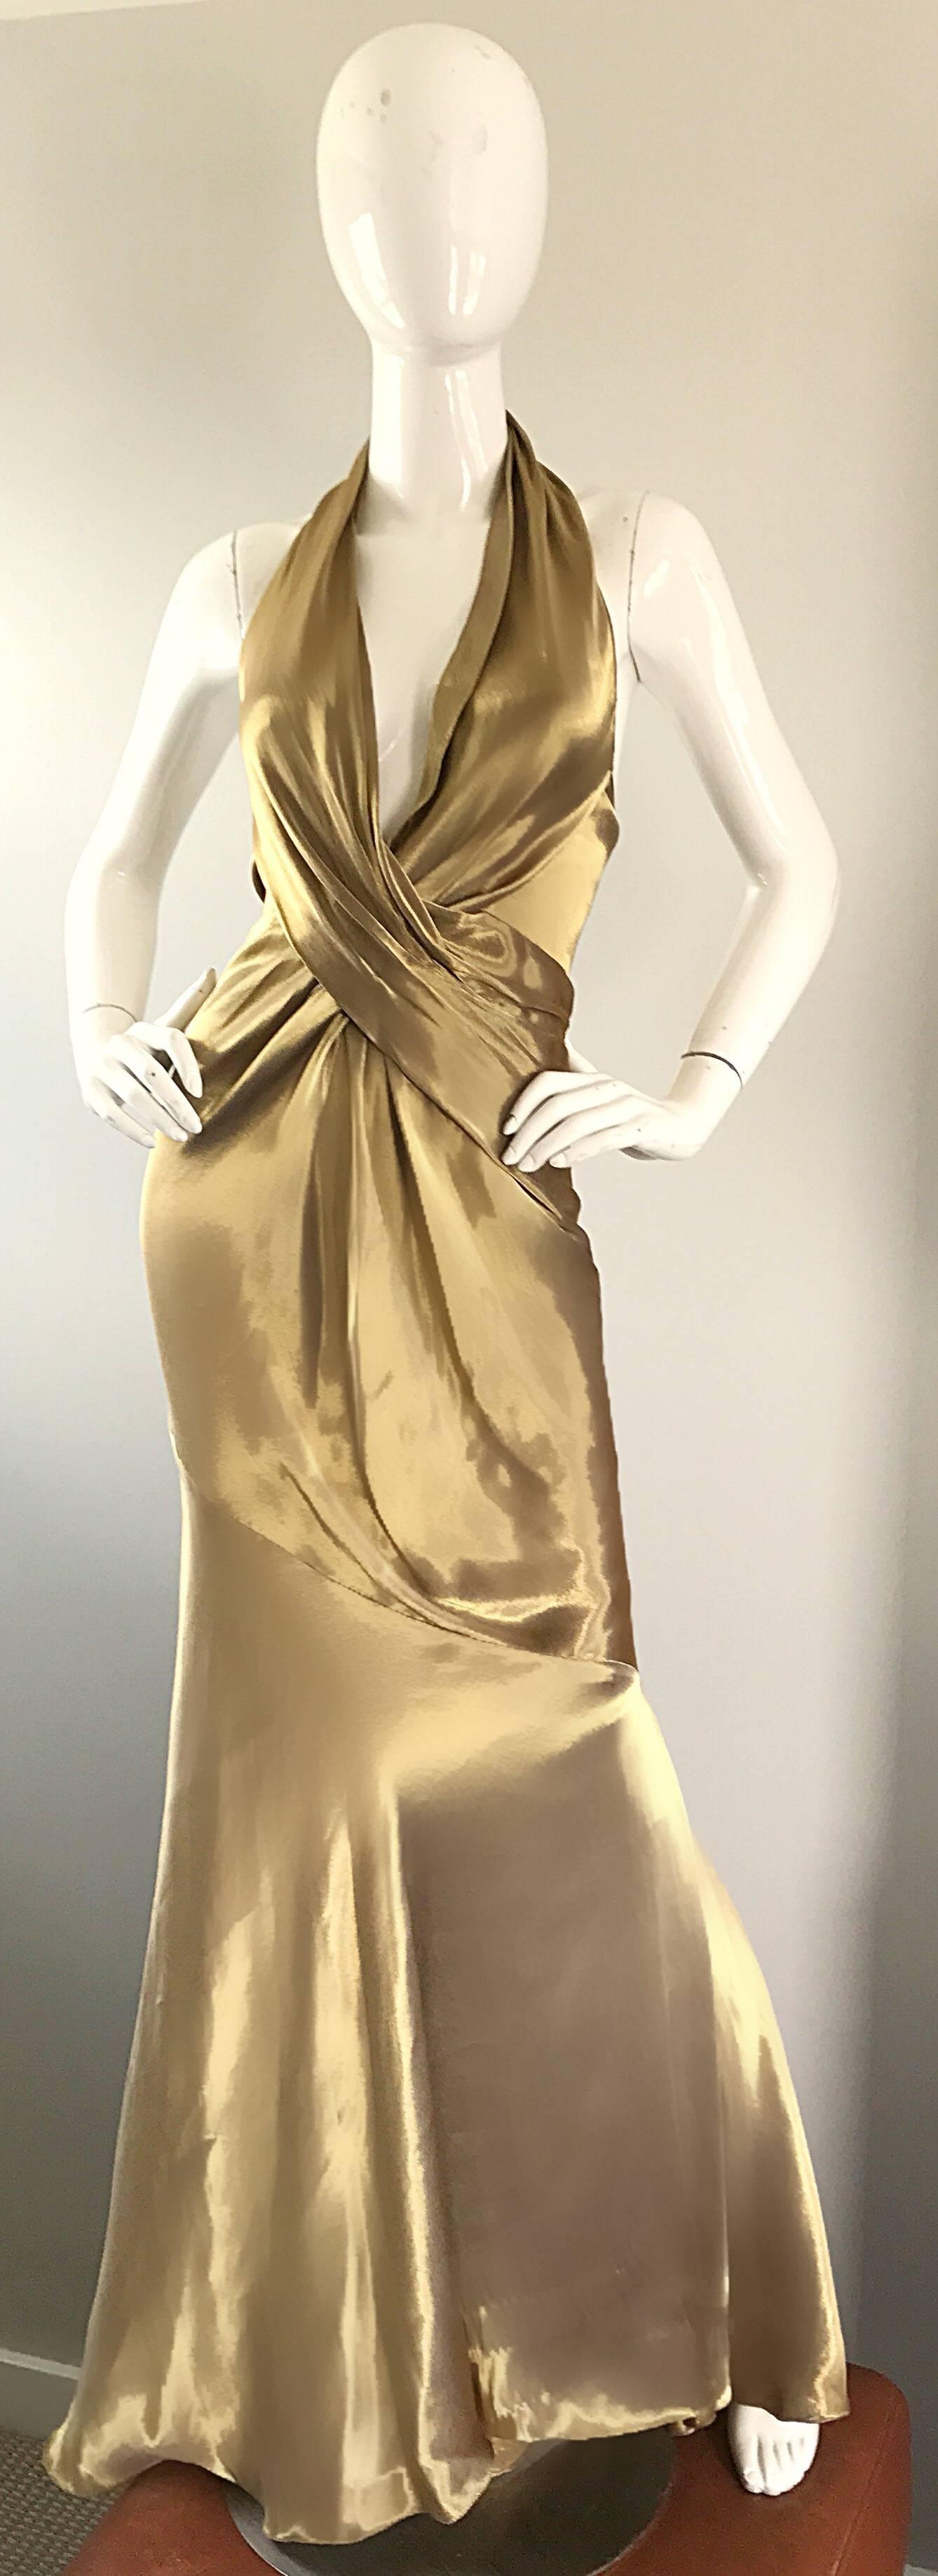 Stunning and sexy 1990s DONNA KARAN black label 'liquid gold' silk halter evening dress. Plunging neckline with an additional built in halter support. Hidden zipper up the side with multiple hook-and-eye closures. Flattering pleated bodice, with a